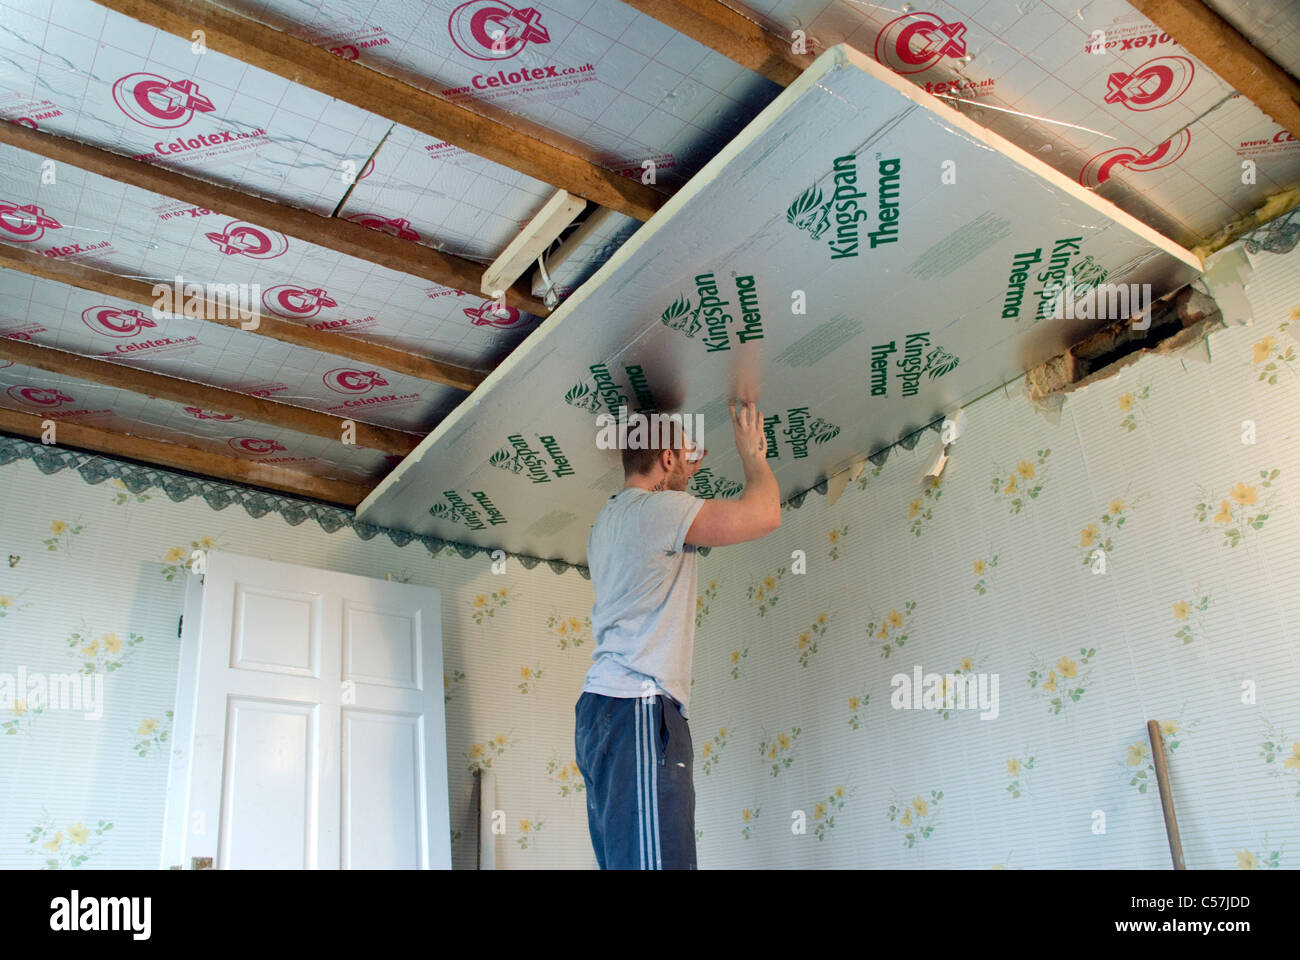 Builders installing high performance Kingspan Therma and Celotex insulation boards to the walls and ceiling of an older house Stock Photo